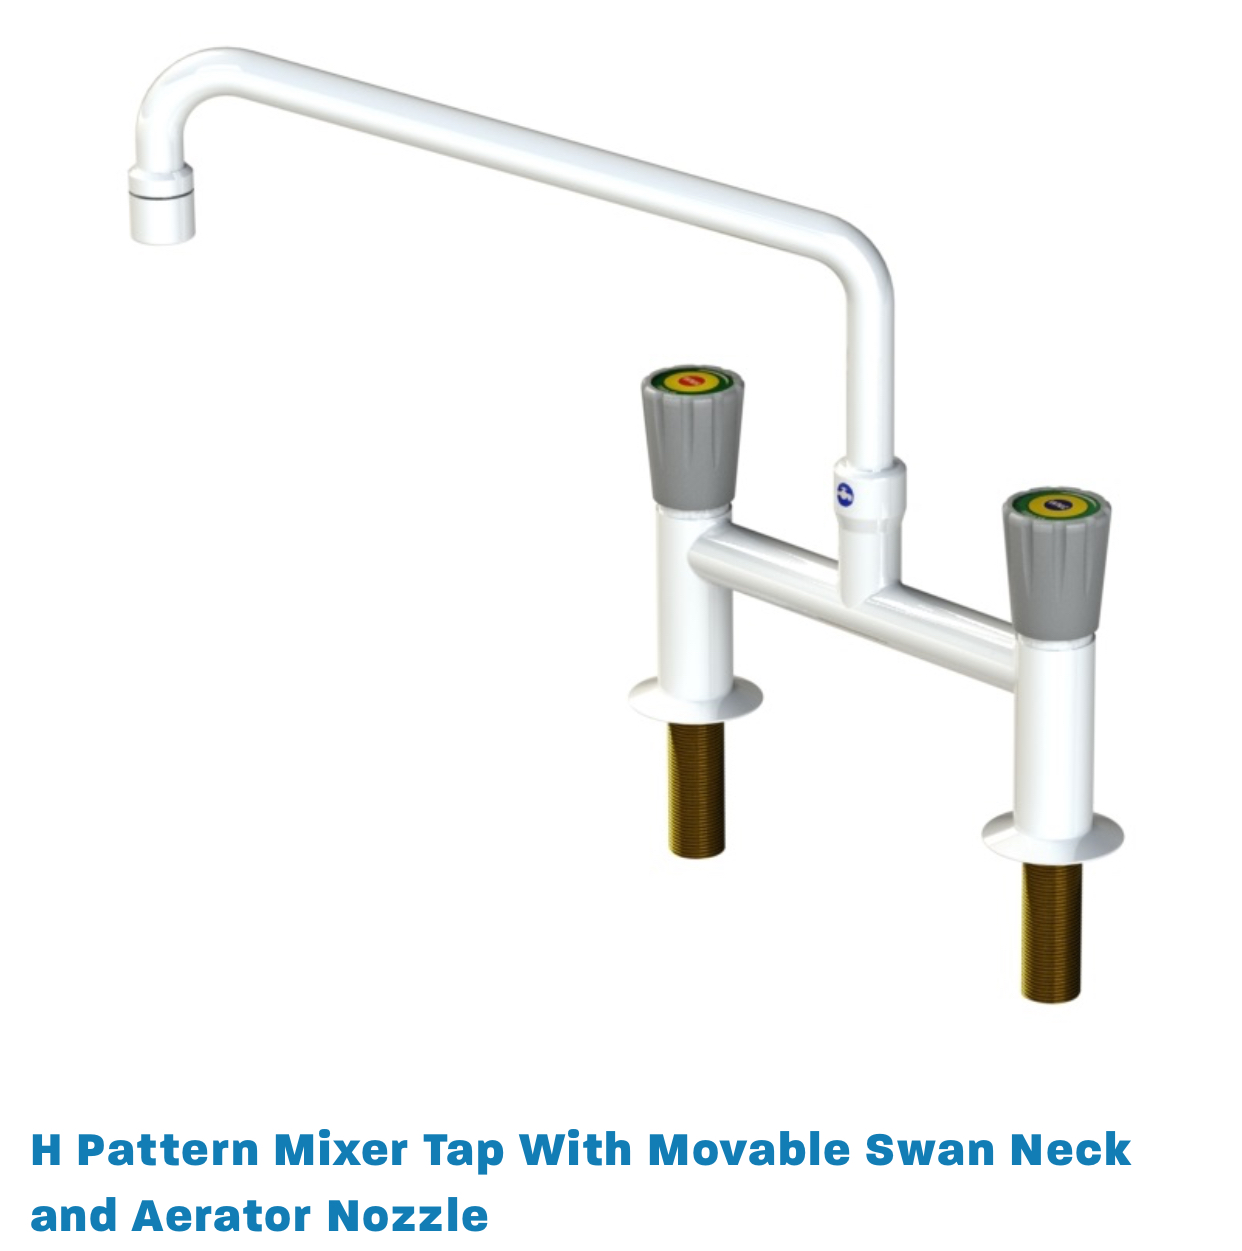 Laboratory swivel swan neck mixer hot and cold water tap school or commercial 